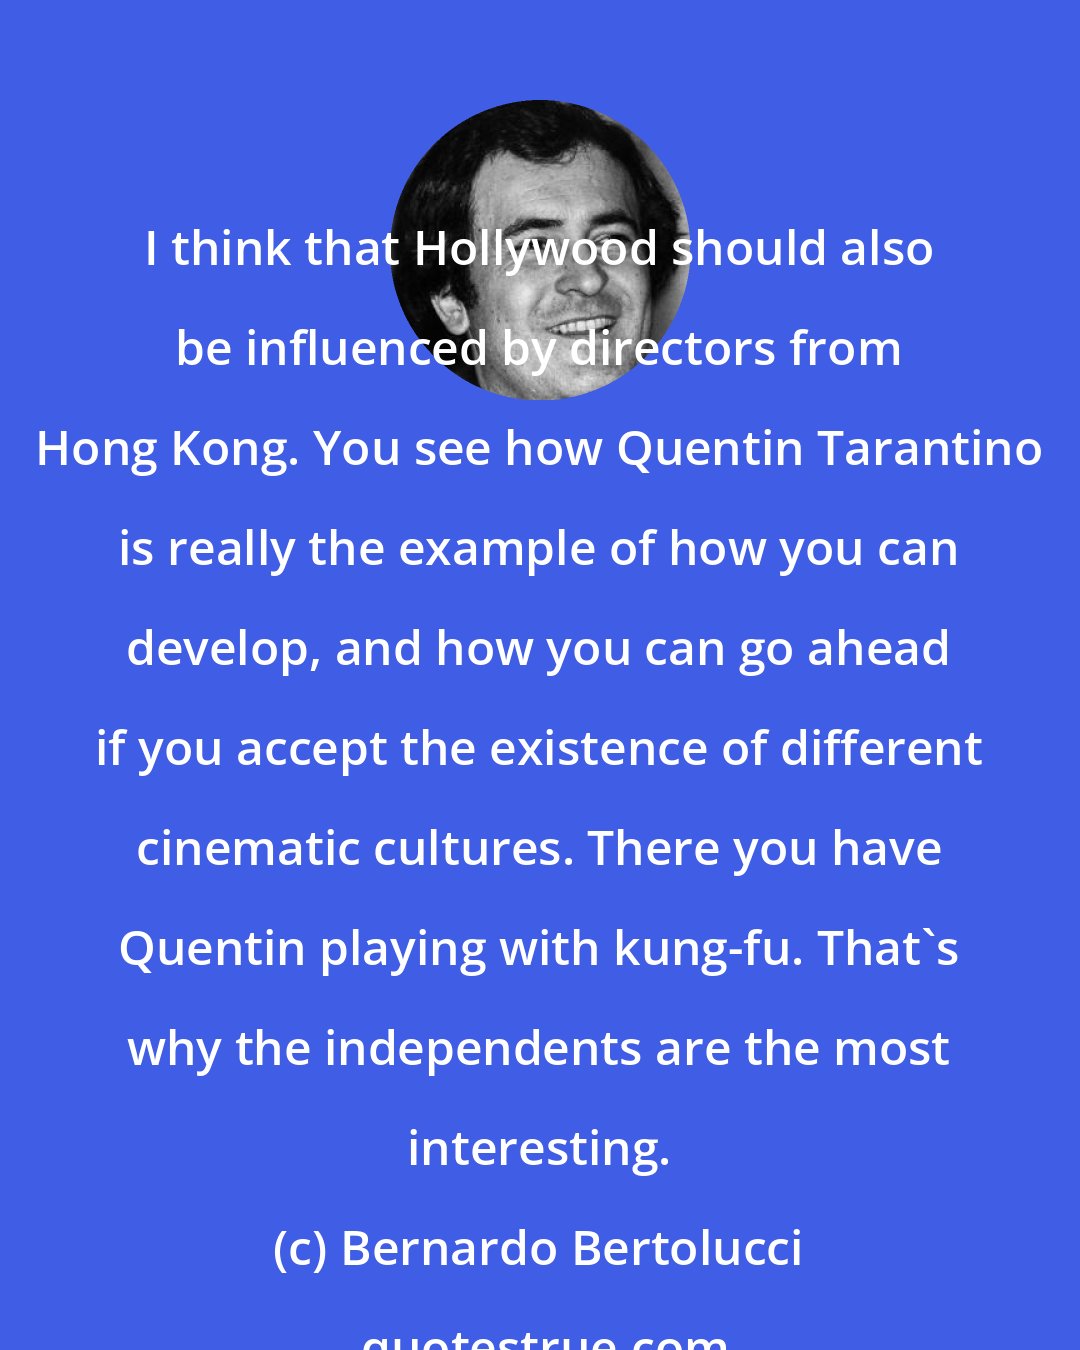 Bernardo Bertolucci: I think that Hollywood should also be influenced by directors from Hong Kong. You see how Quentin Tarantino is really the example of how you can develop, and how you can go ahead if you accept the existence of different cinematic cultures. There you have Quentin playing with kung-fu. That's why the independents are the most interesting.